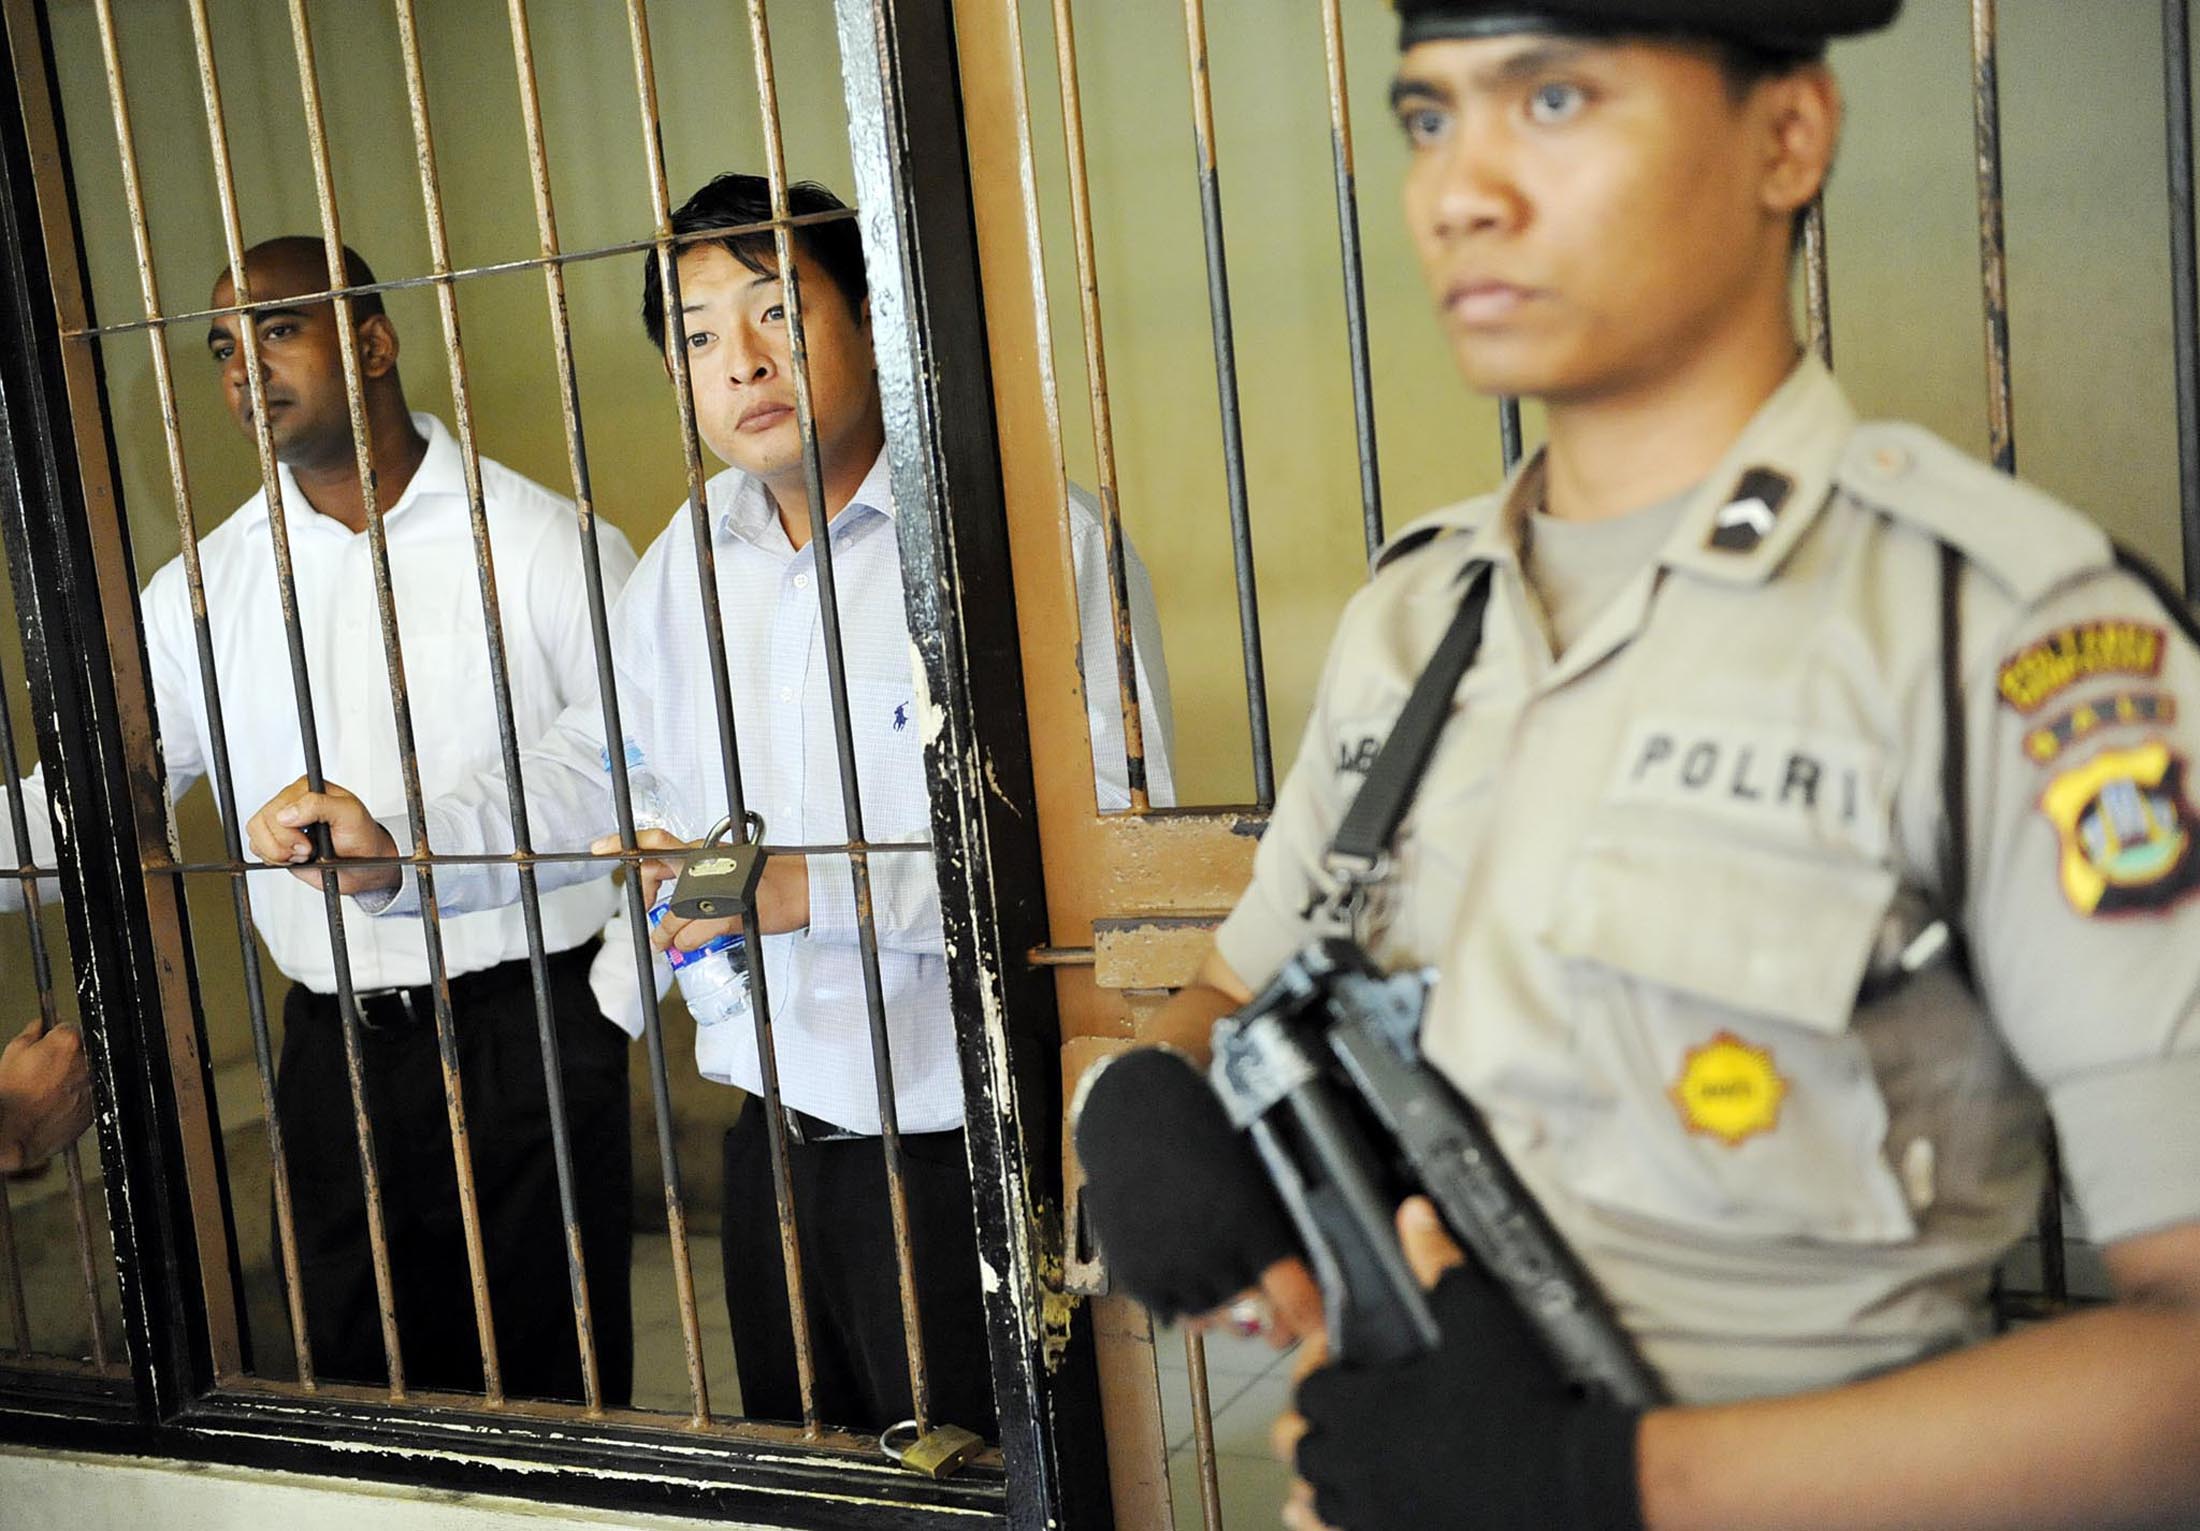 Australian death-row prisoners Andrew Chan, center, and Myuran Sukumaran, left, are seen in a holding cell waiting to attend a review hearing in the District Court of Denpasar, on the Indonesian island of Bali, on Oct. 8, 2010 (Antara Photo Agency/Reuters)